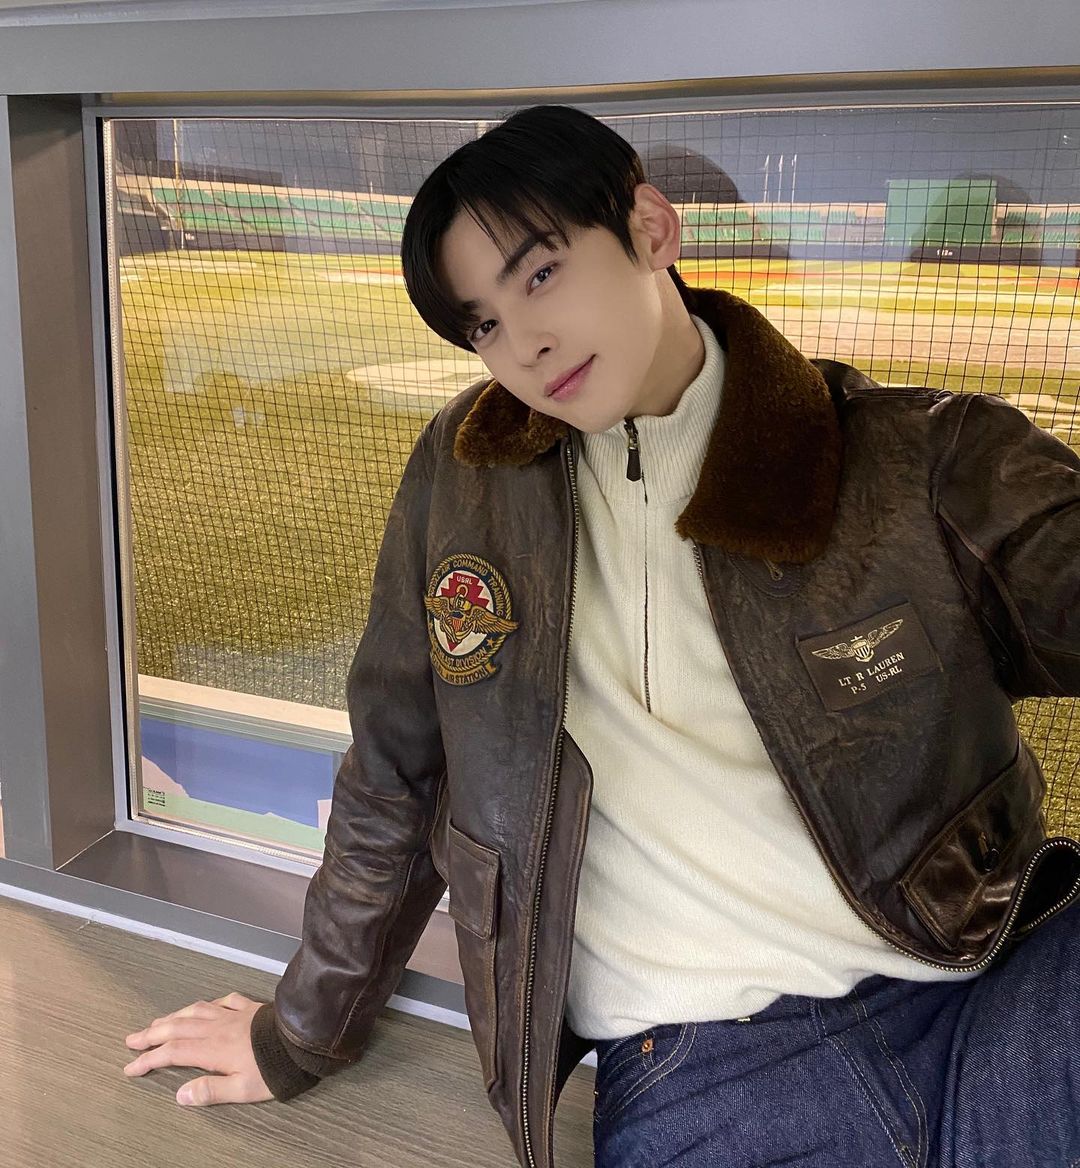 Cha Eun woo's best style moments